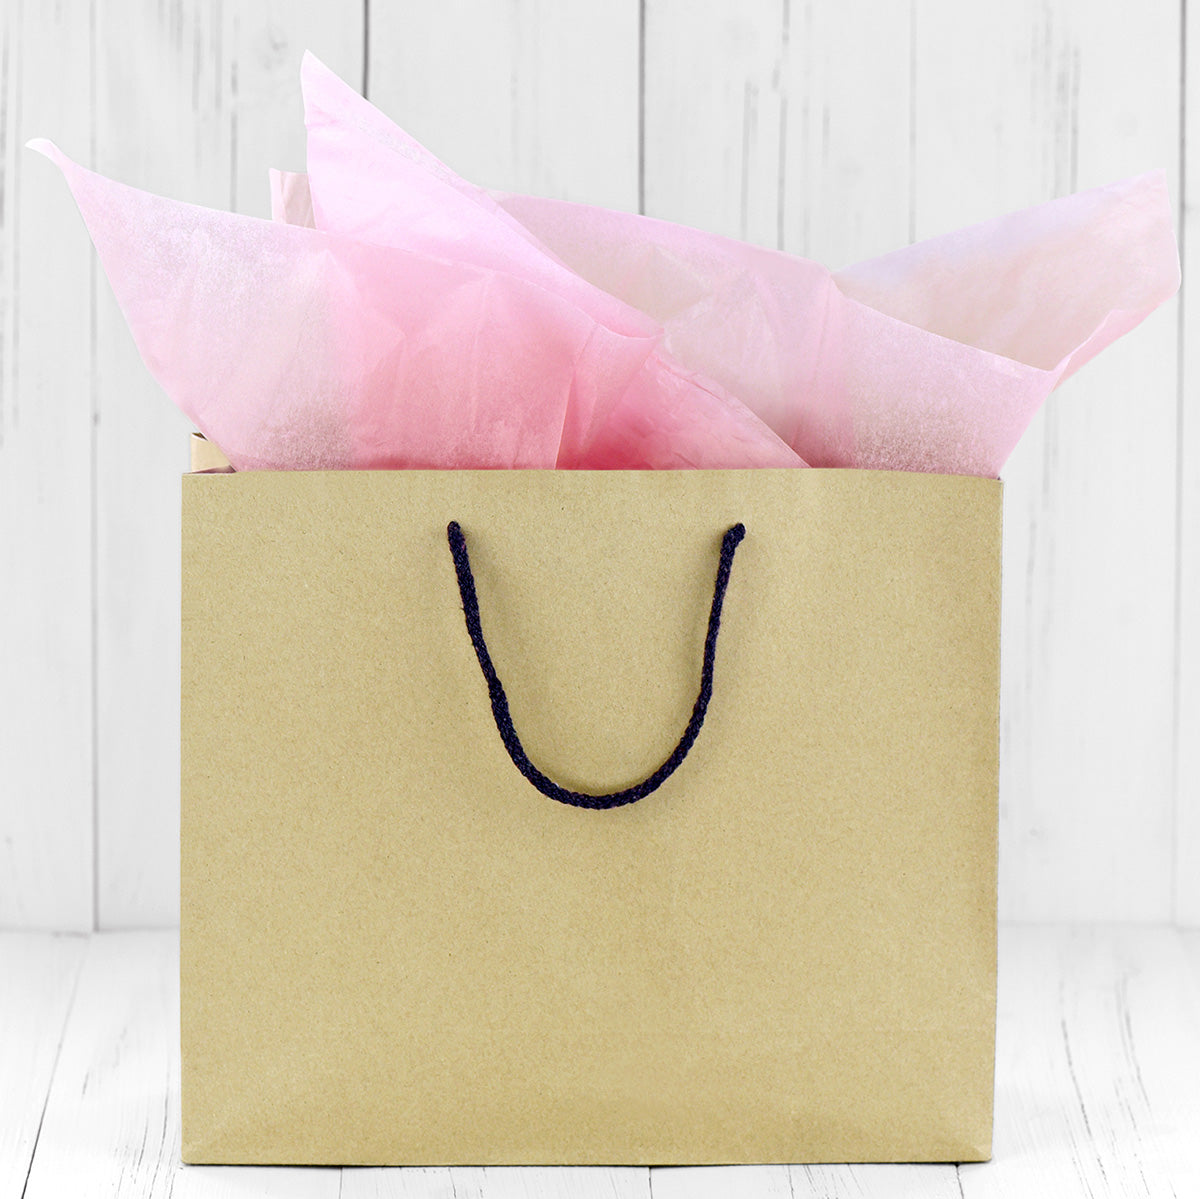 50 Sheets Pink Wrapping Tissue Paper